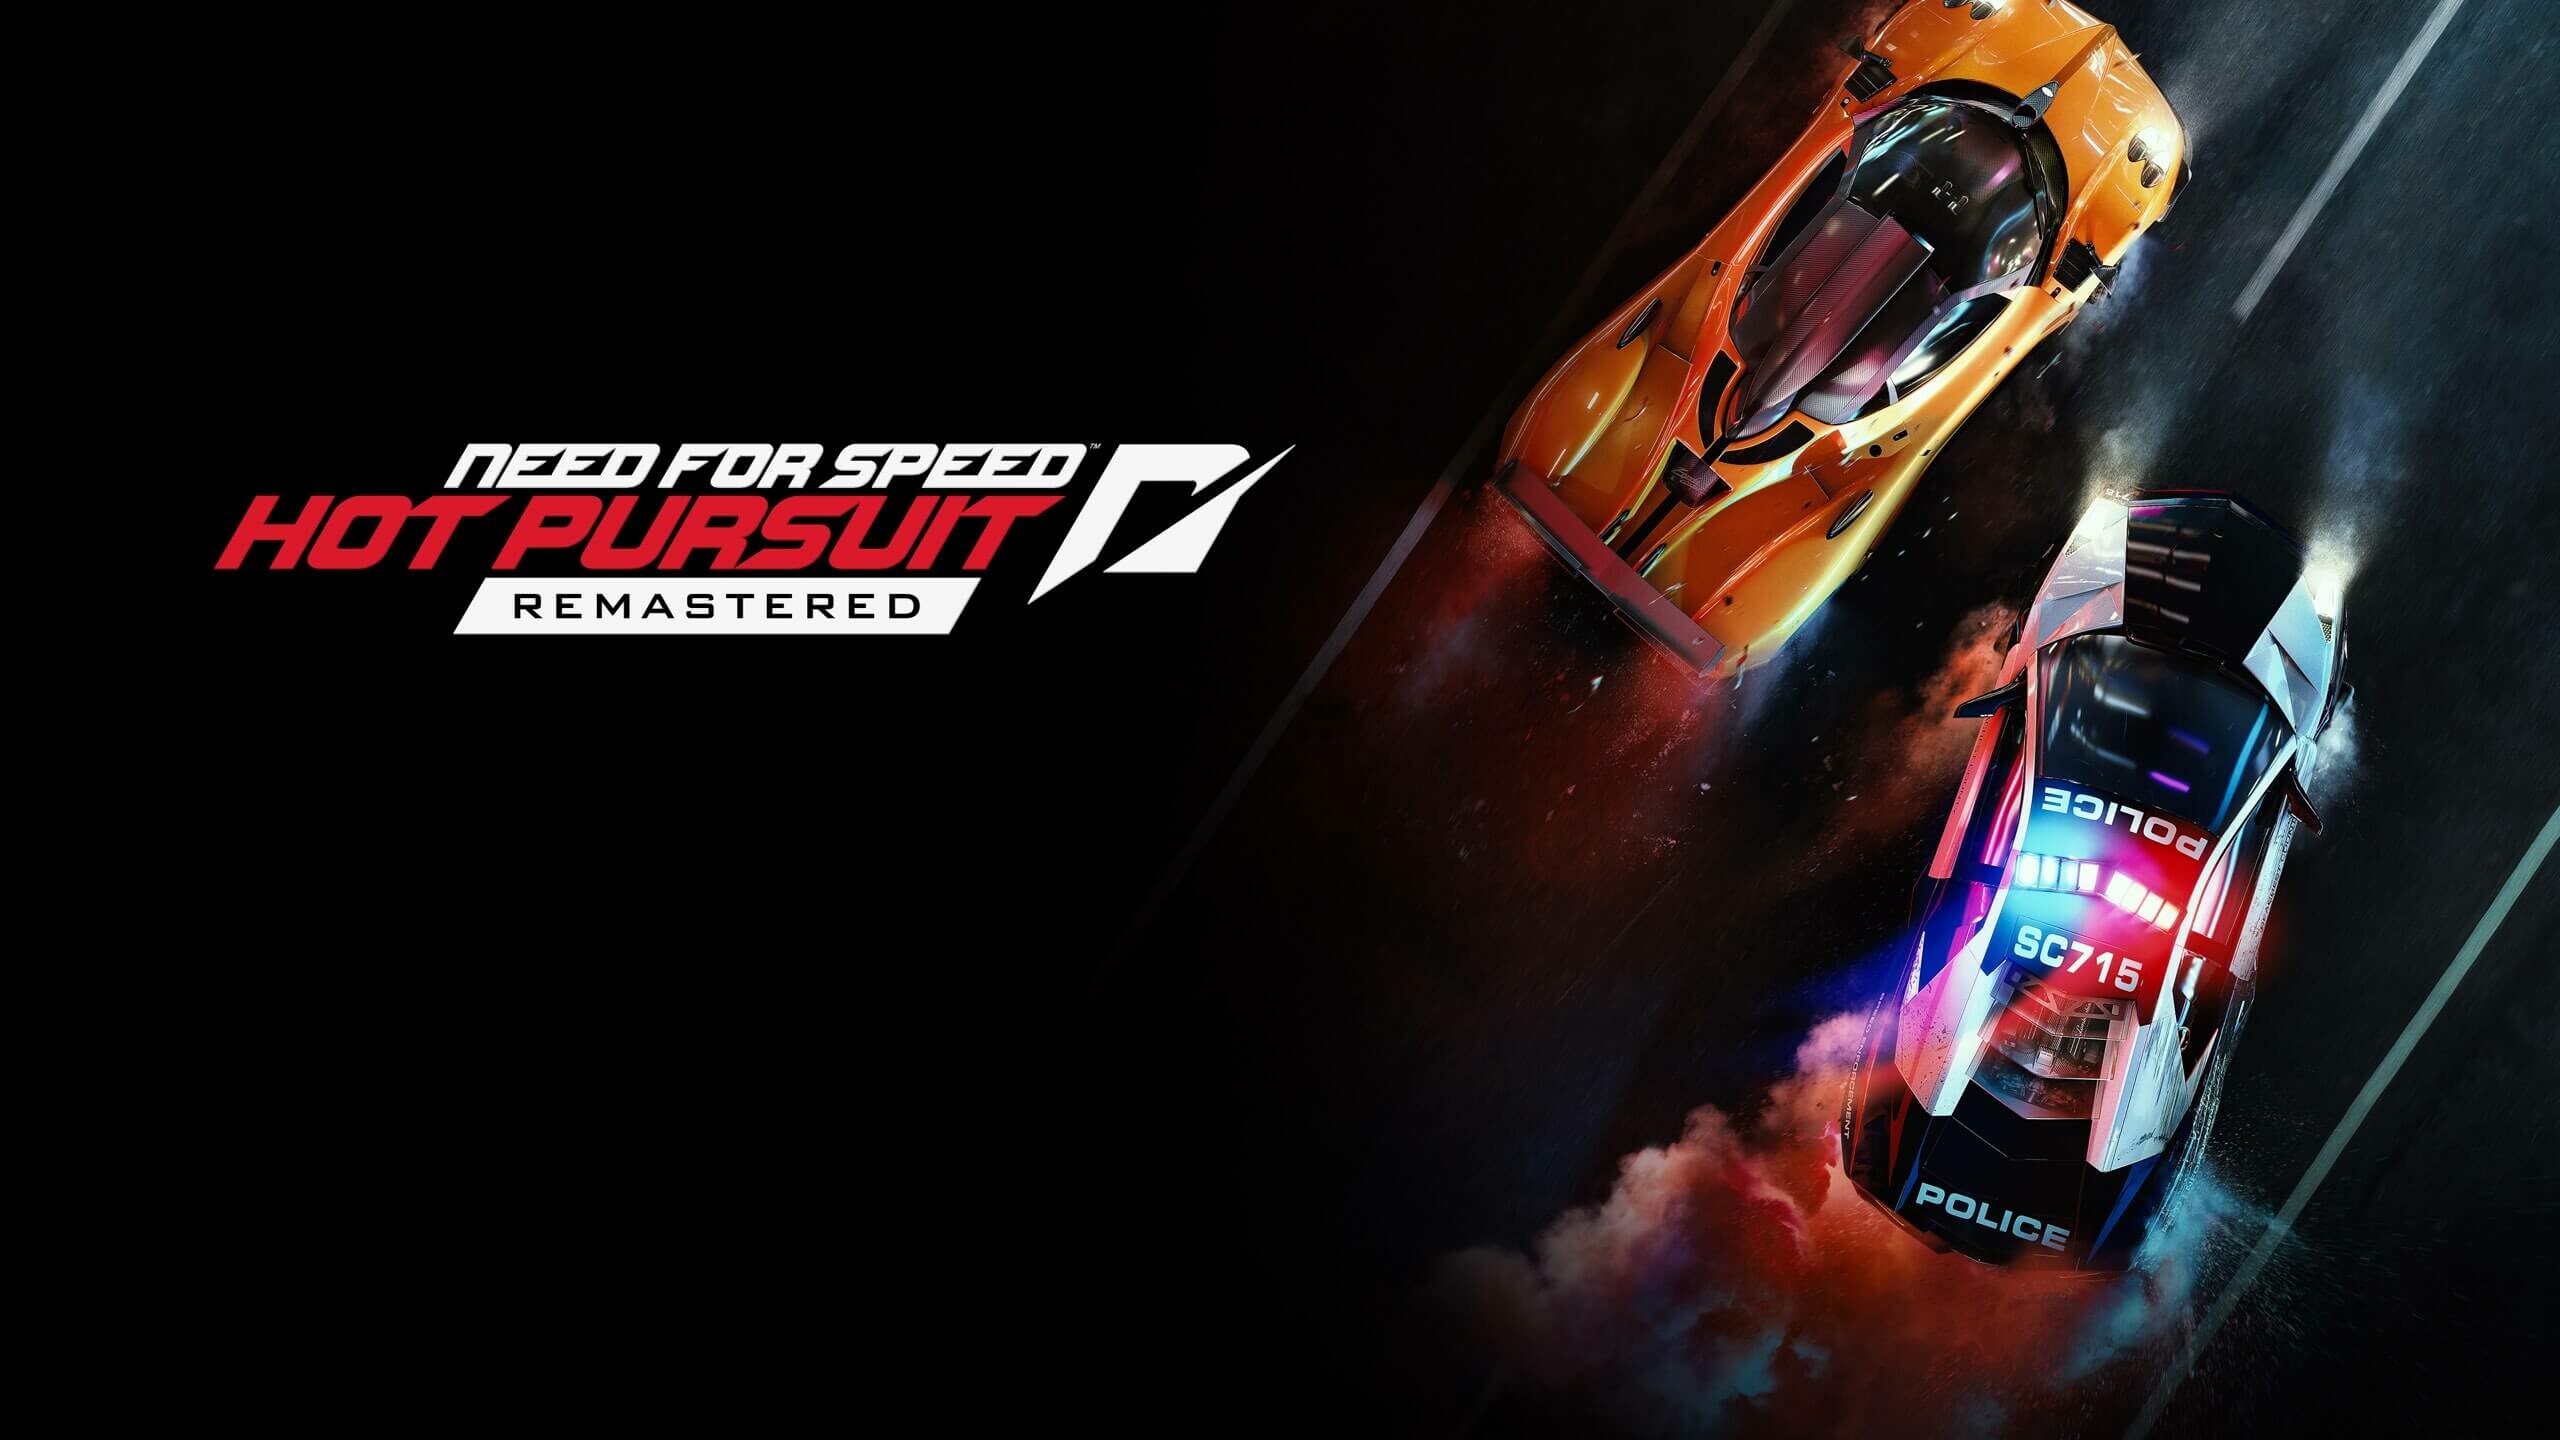 Need for Speed Hot Pursuit Remastered: The Wii version was developed by Exient Entertainment. 2560x1440 HD Wallpaper.